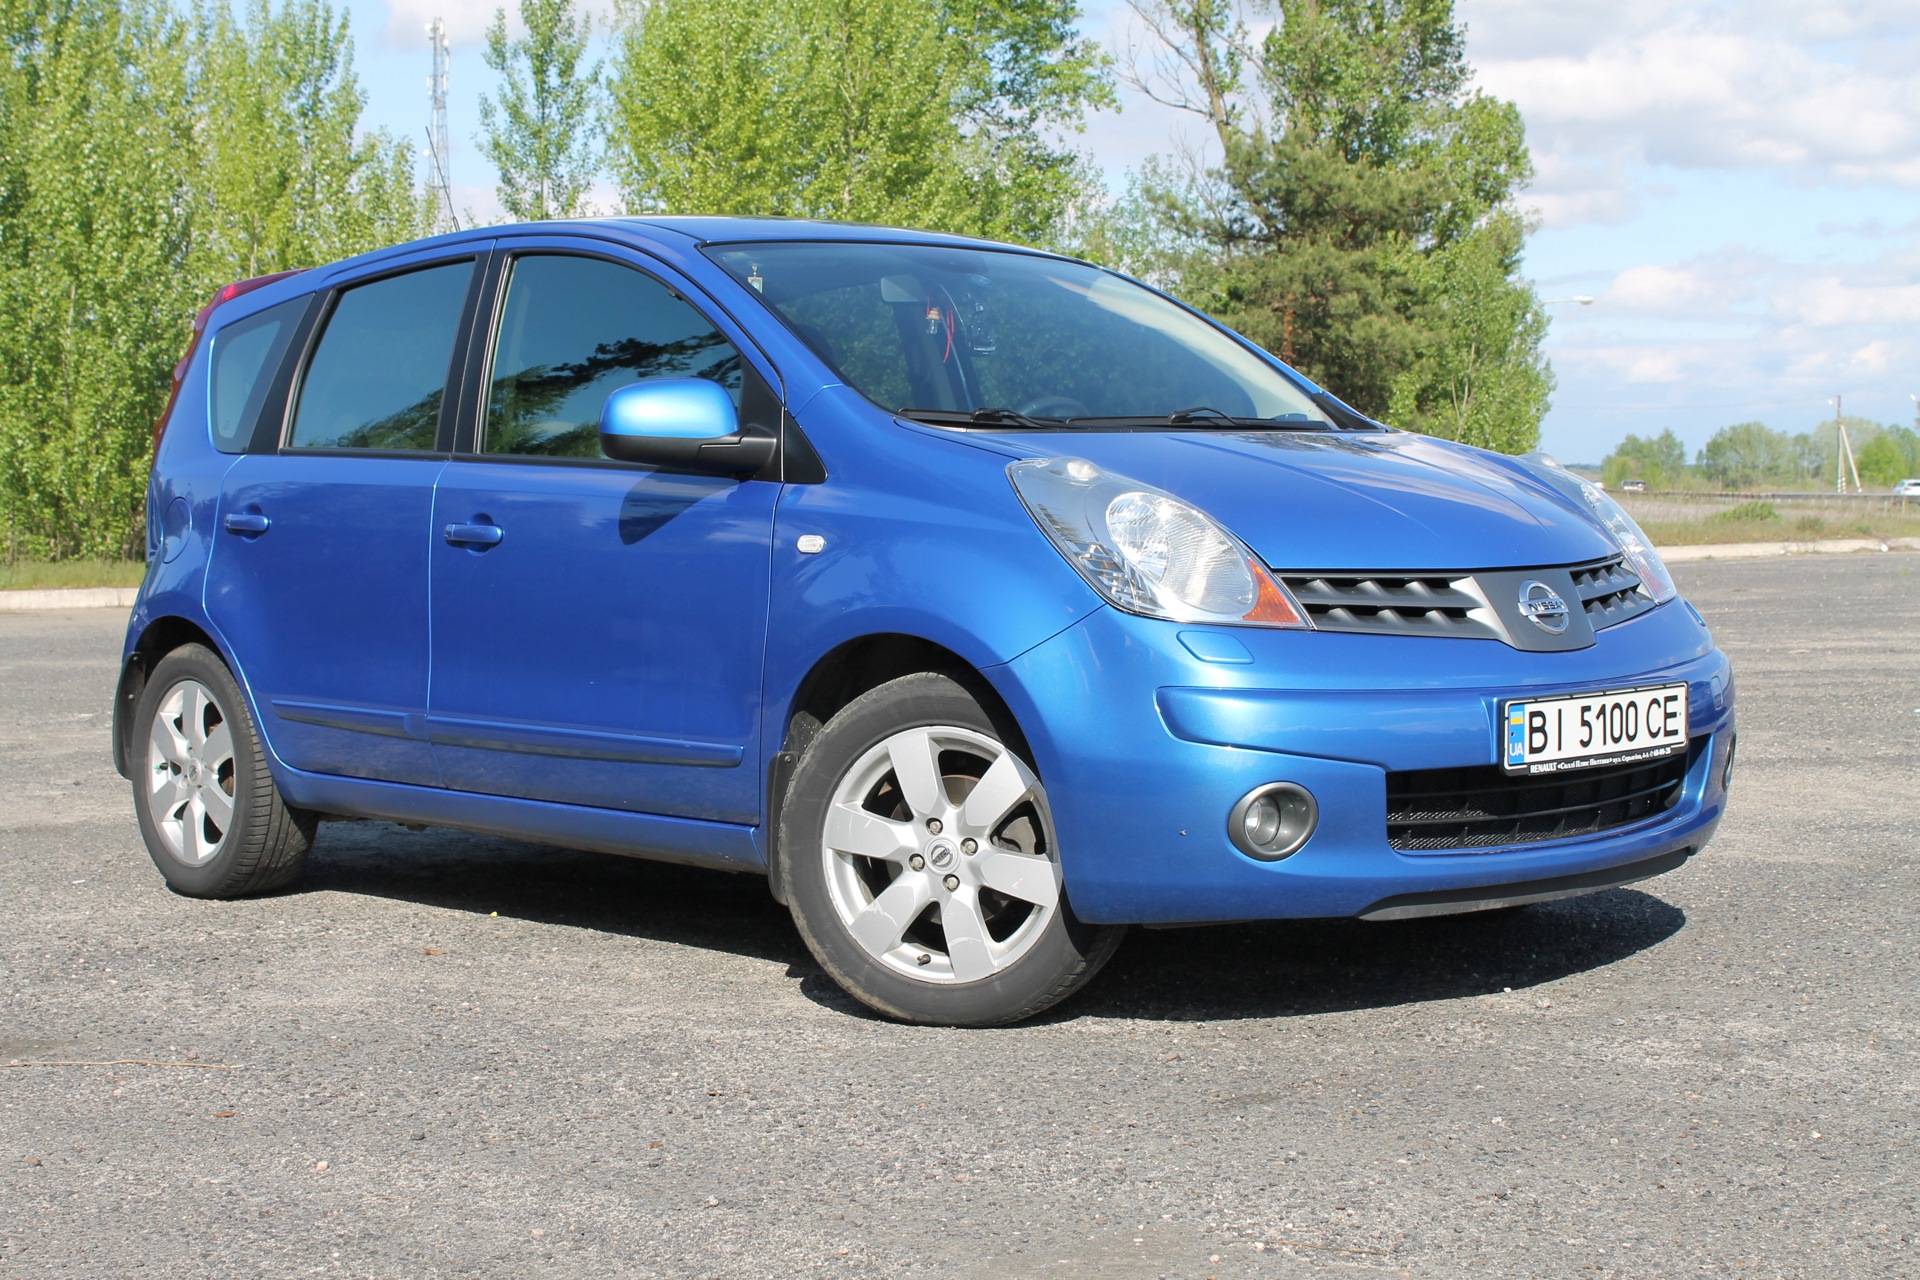 Nissan note 2008 год. Nissan Note 2008. Ниссан ноут 2008 1.6 автомат. Nissan Note 2005. Ниссан ноут 2008г.